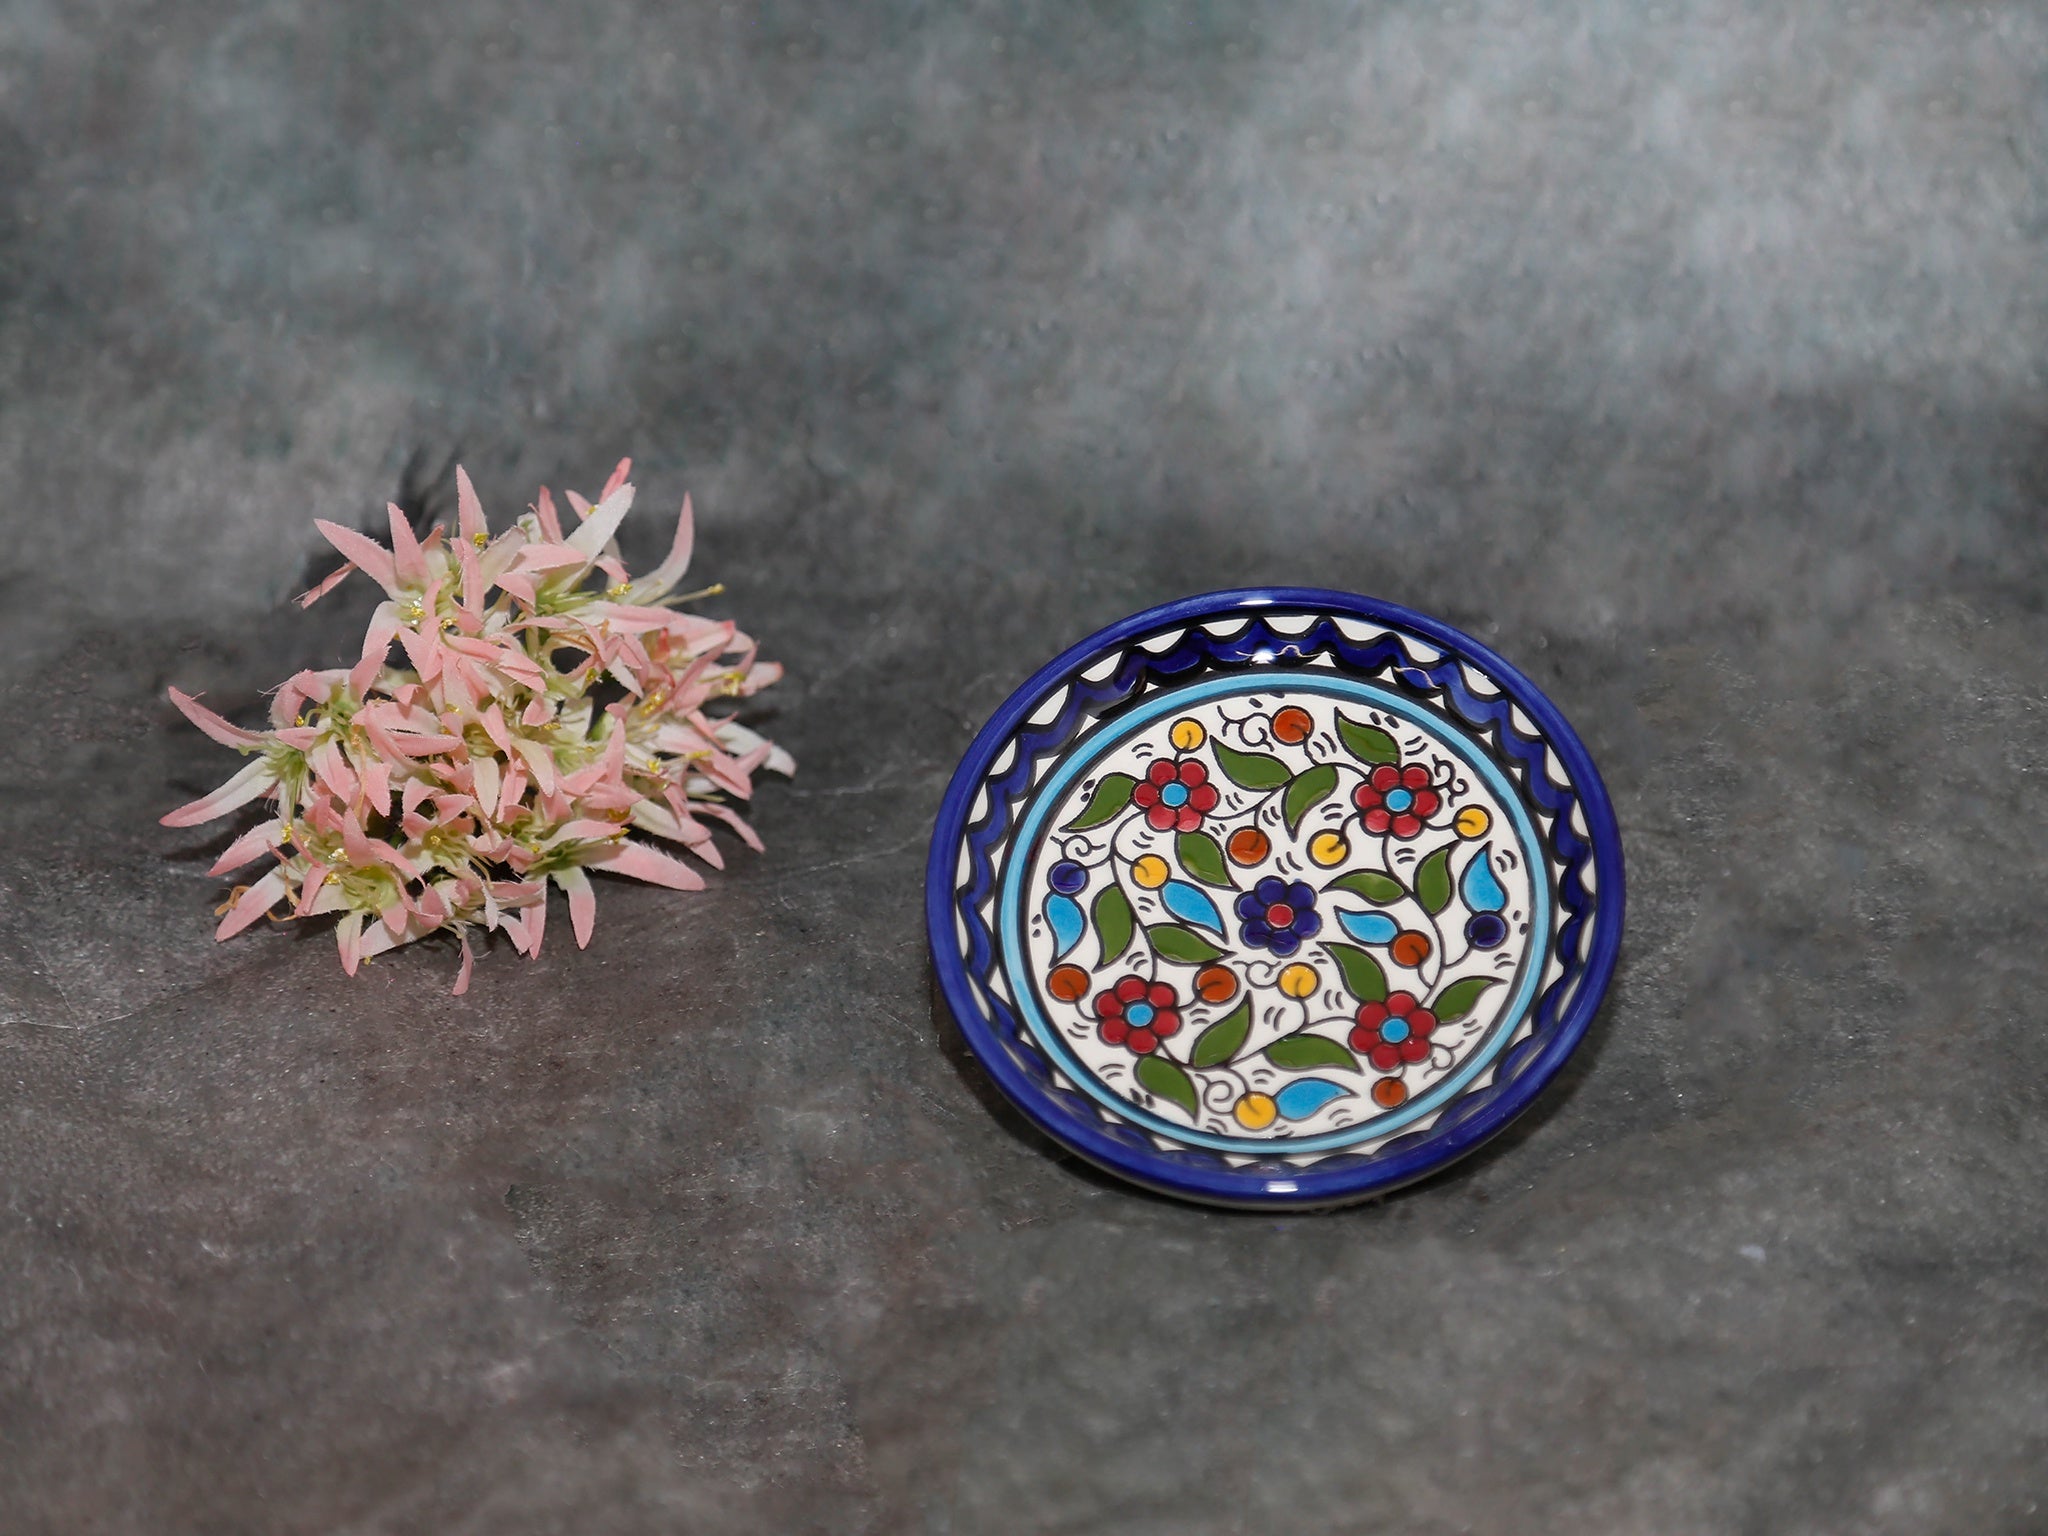 Bowl with flowers